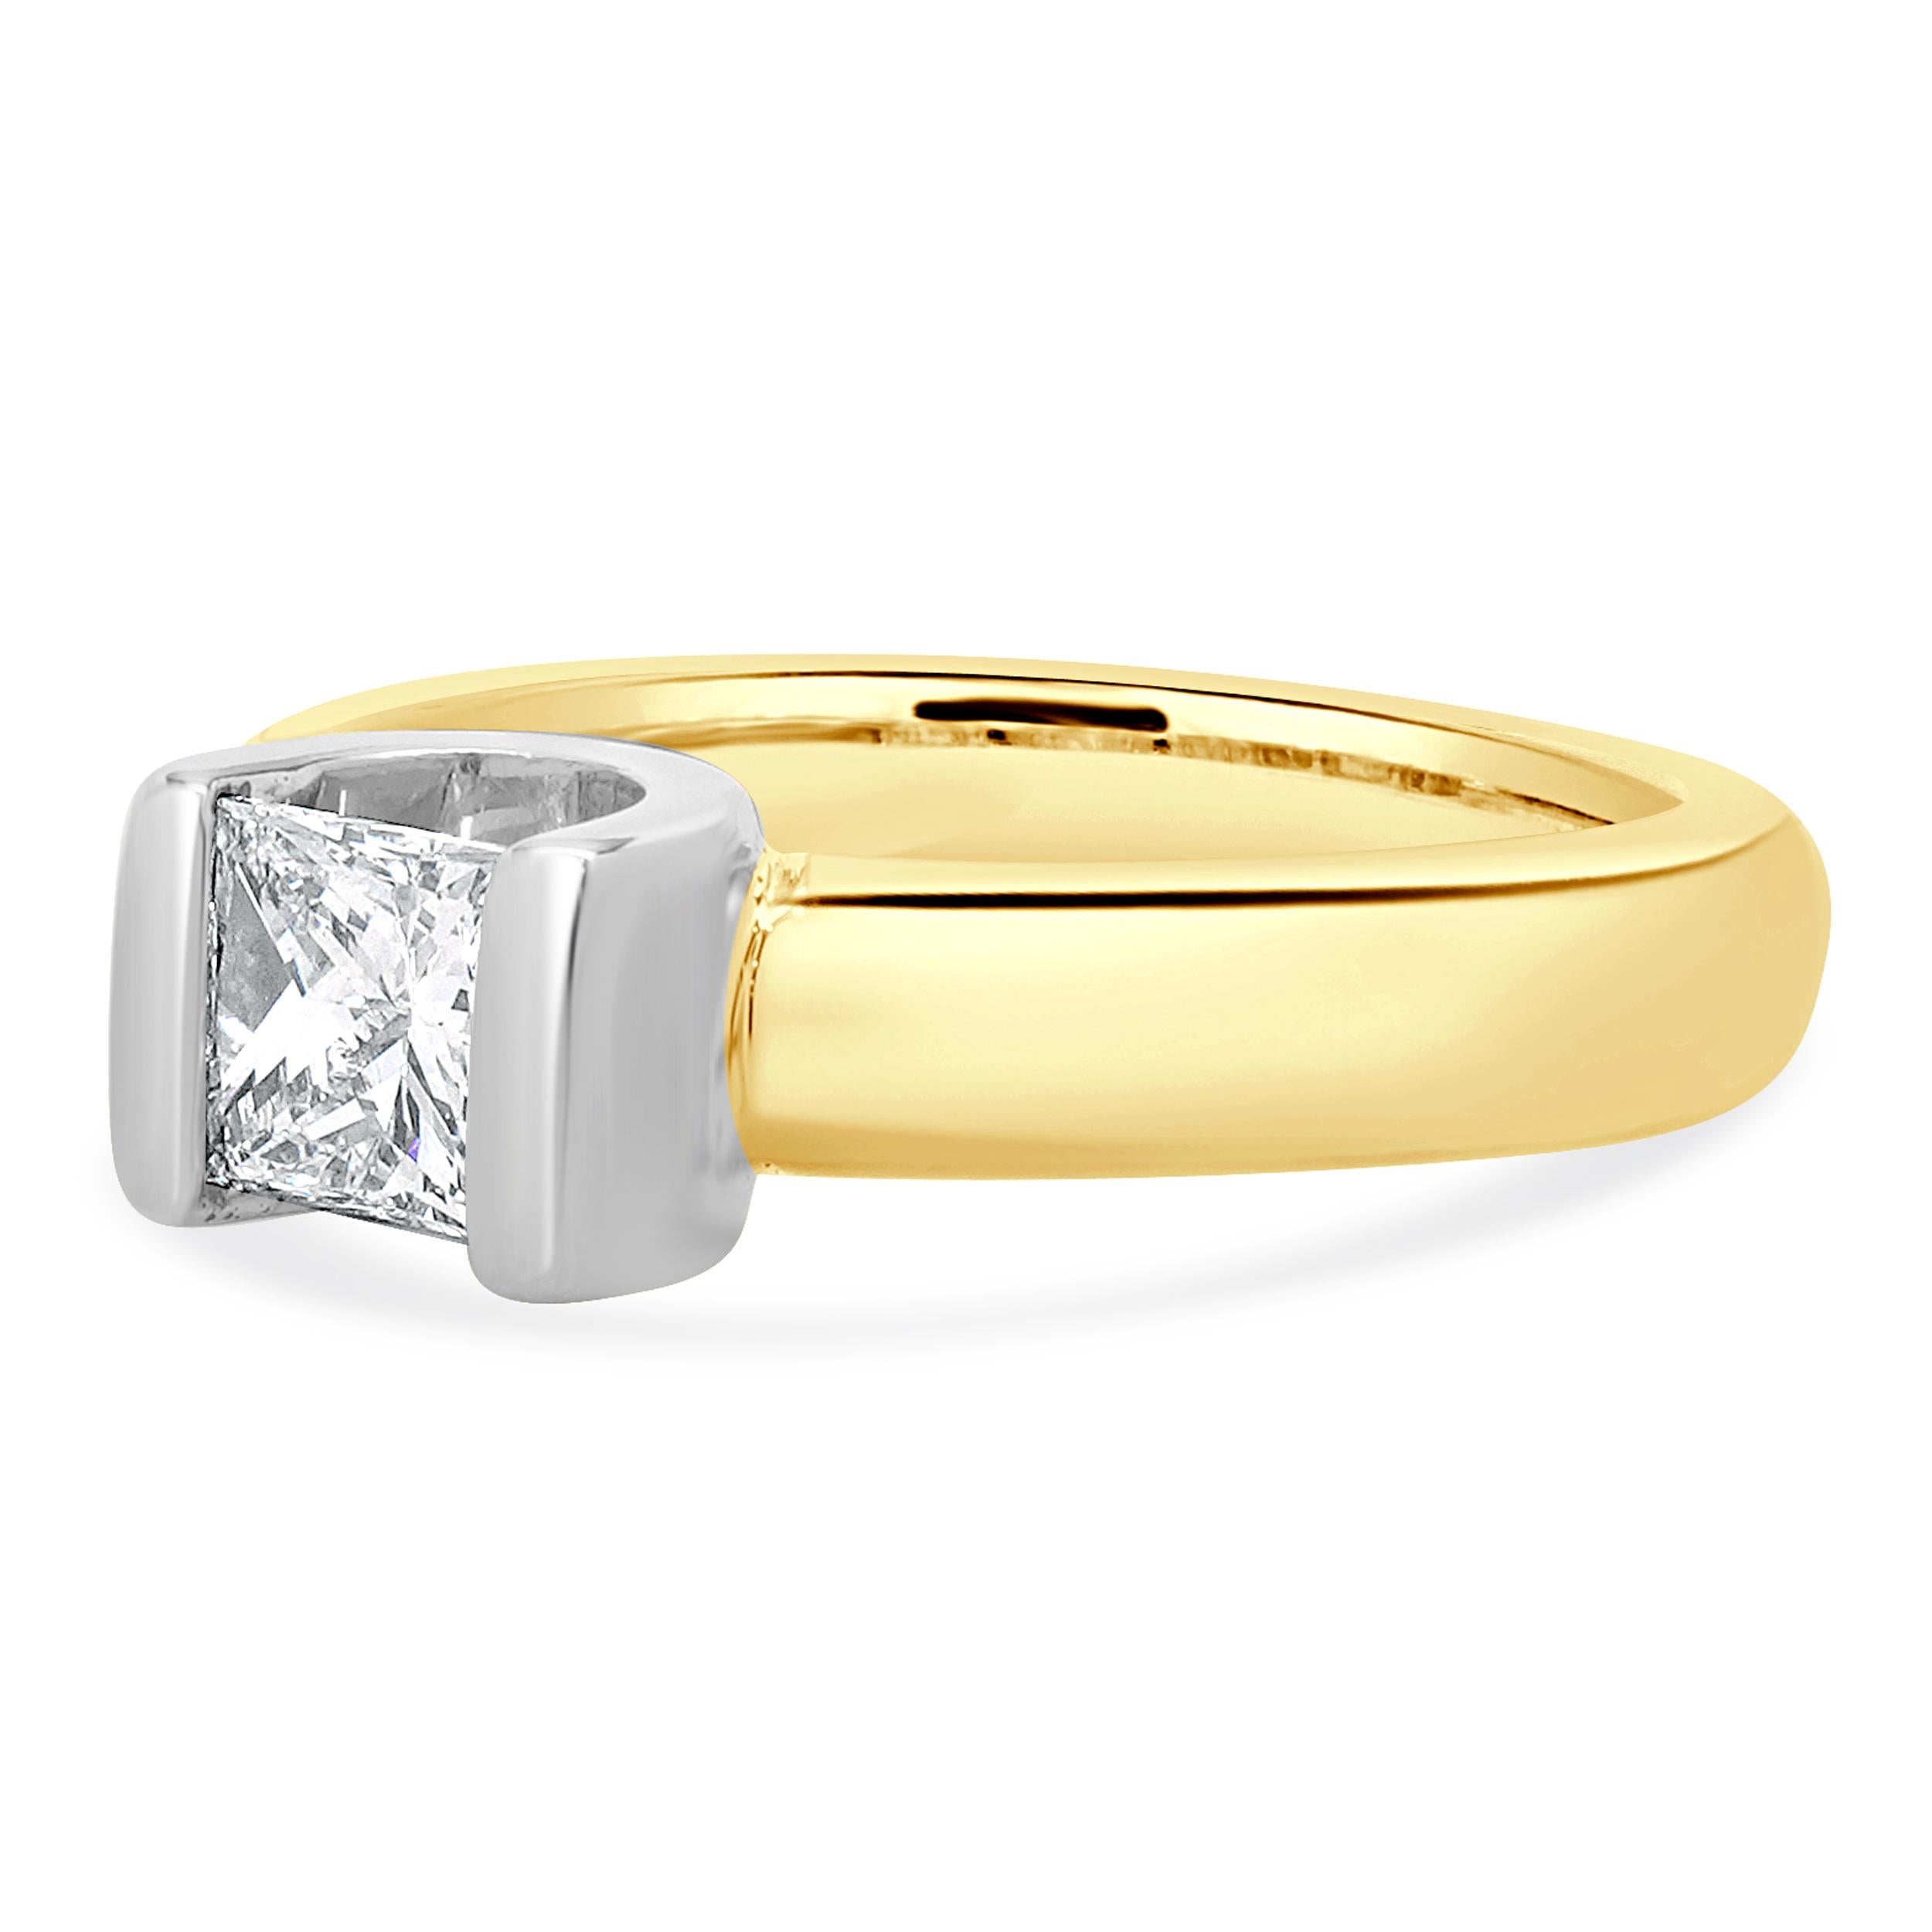 Designer: custom
Material: 14K yellow gold
Center Diamond: 1 princess cut = 0.63ct
Color : G
Clarity : VS2
Size: 6 complimentary sizing available 
Weight: 5.93 grams
